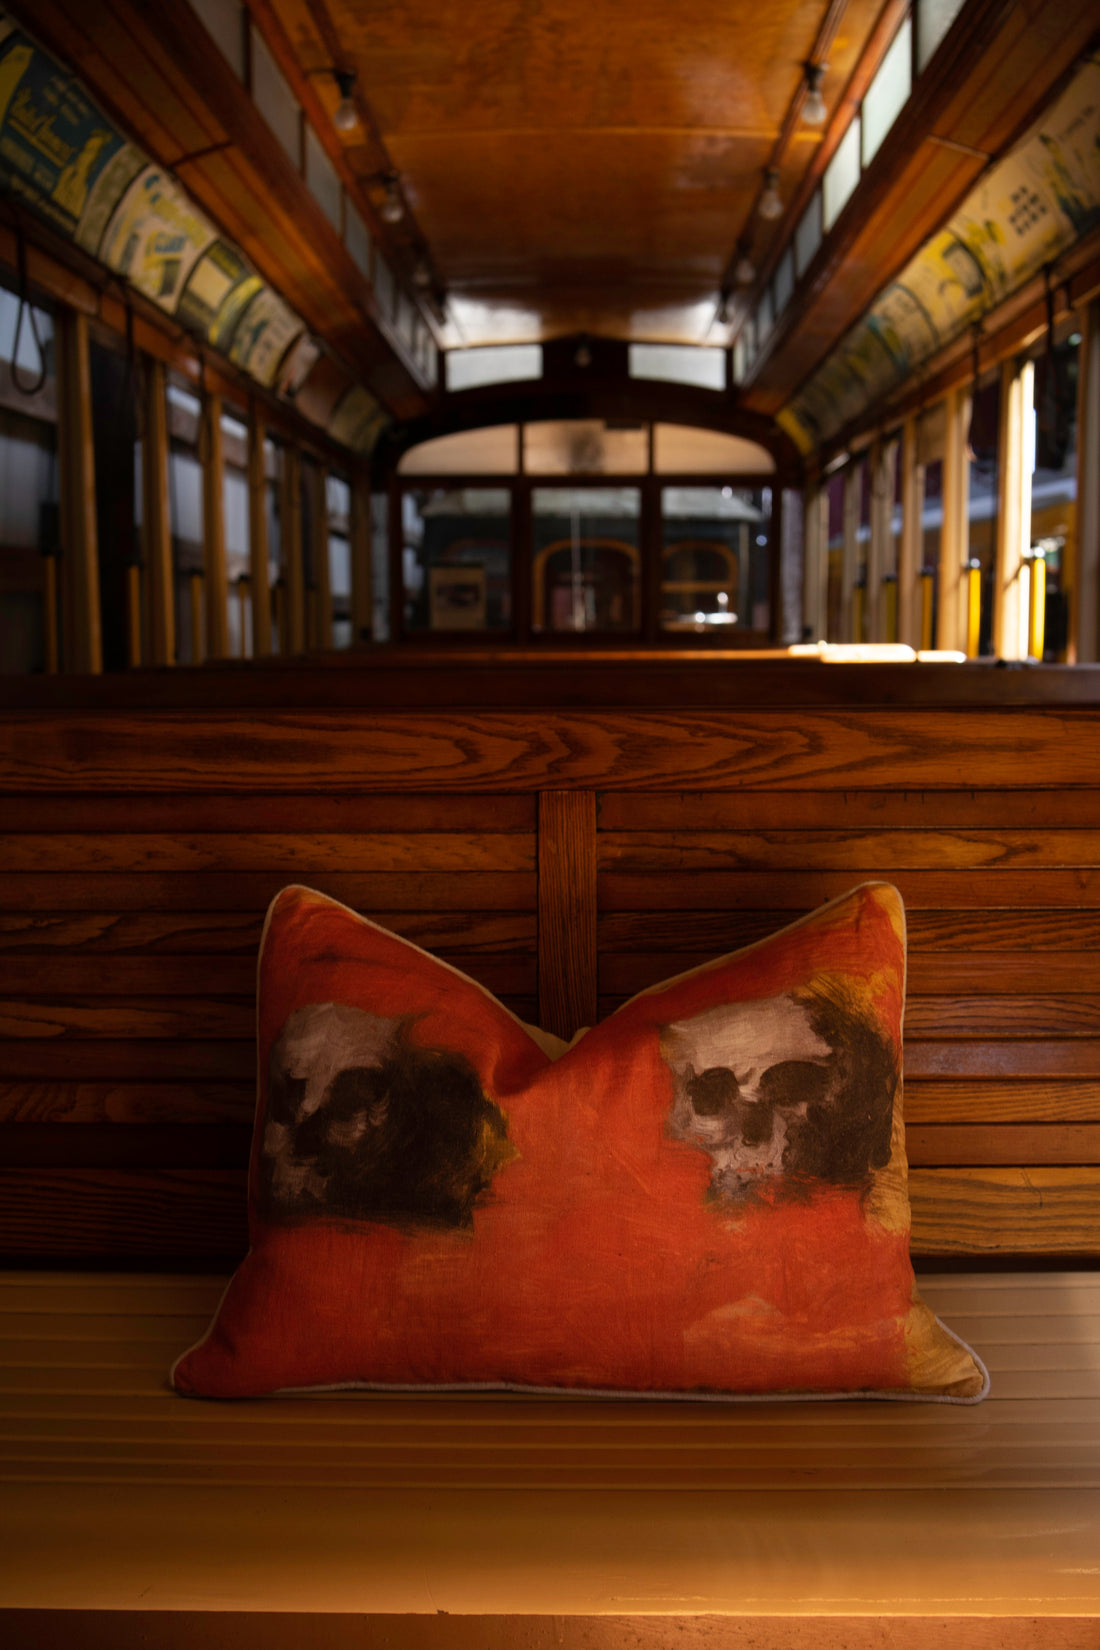 Evangeline's linen 'Twins' pillow, orange with two human skull images, sits on a wooden bench in vintage trolley.